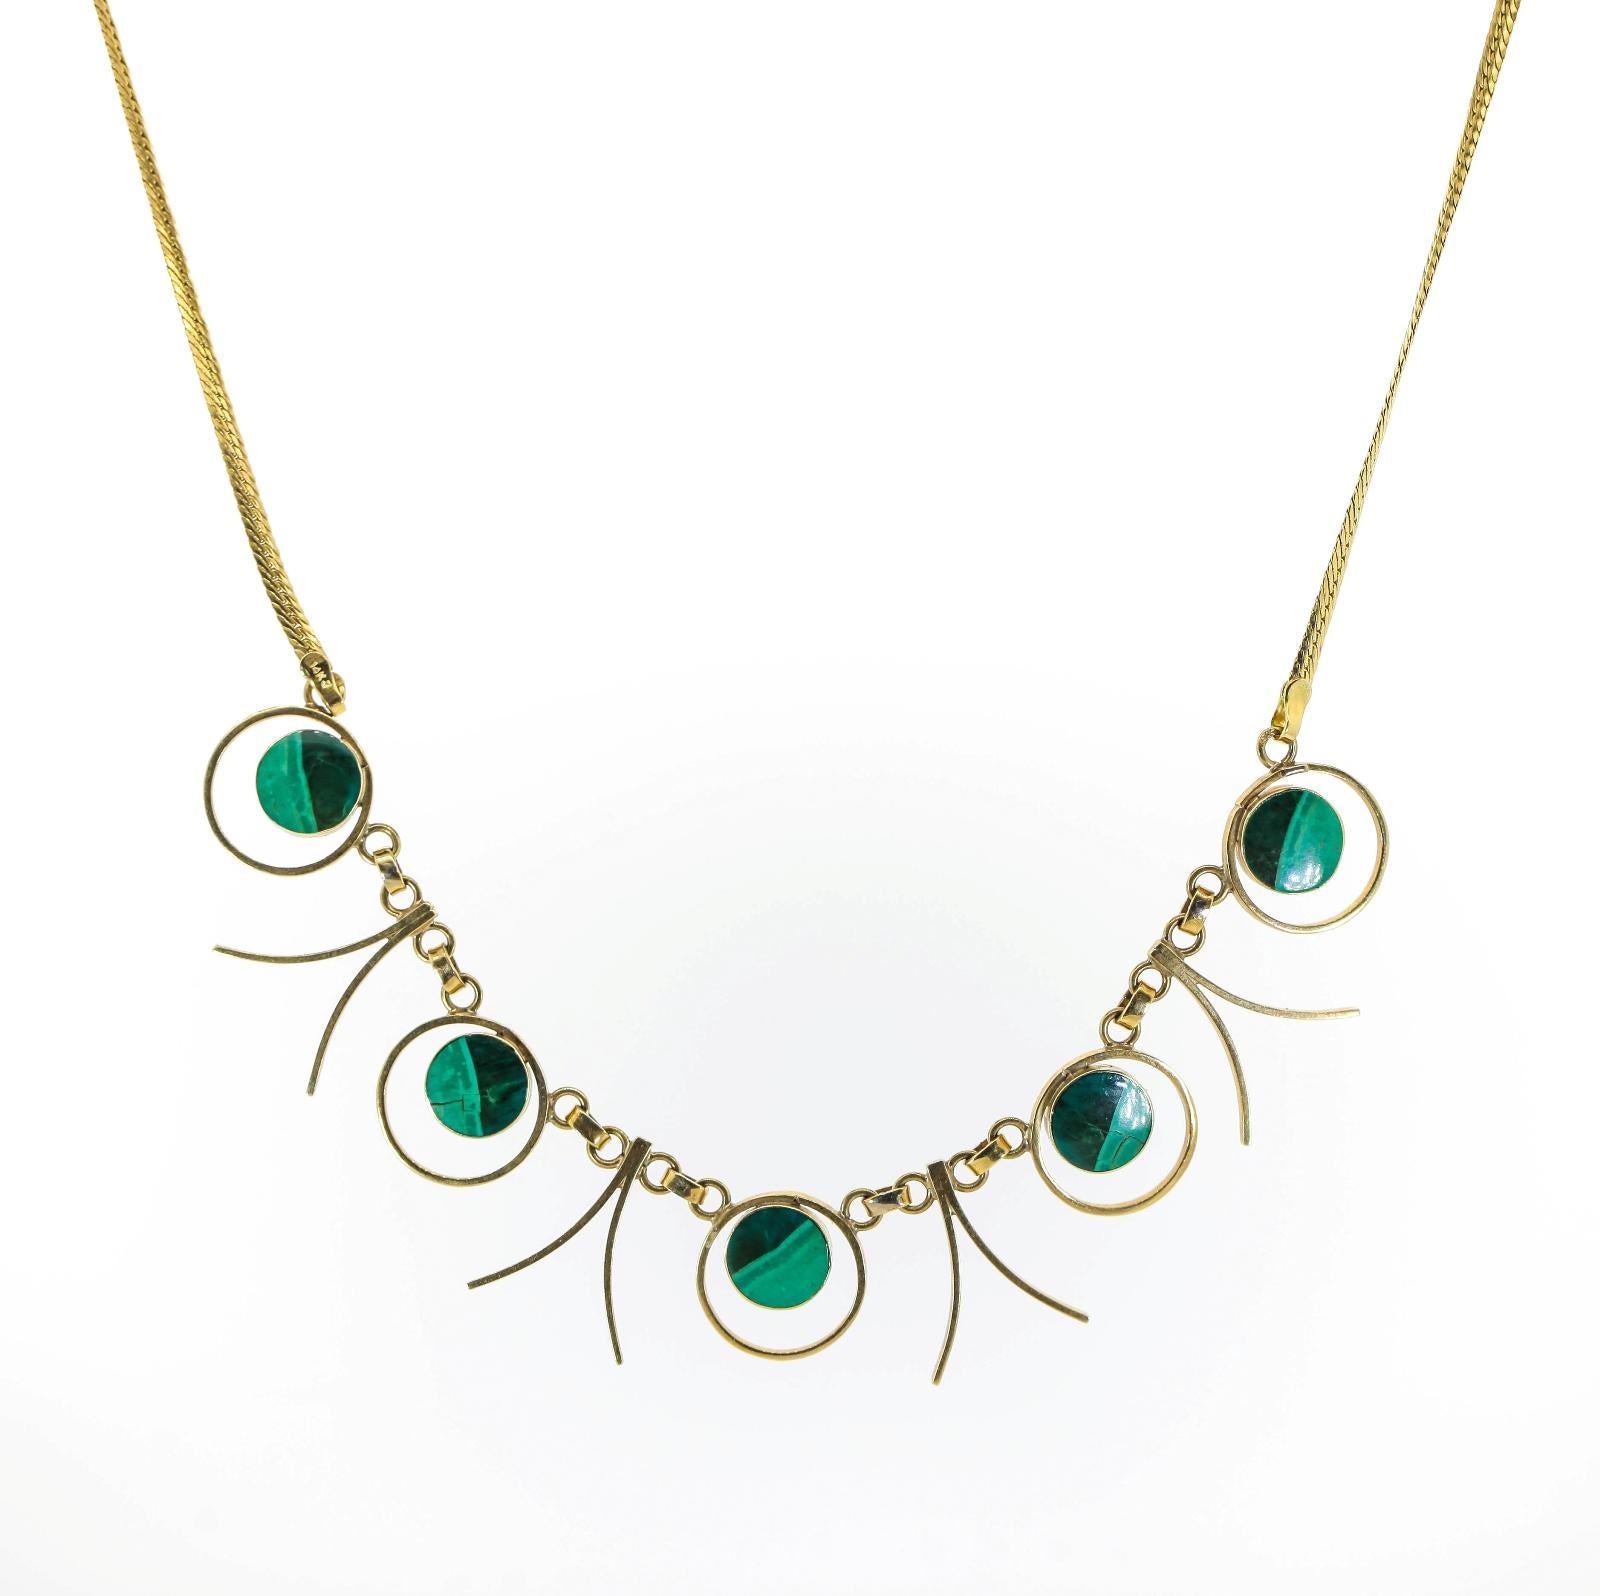 Stylish and dashing this 1960s necklace composed of five flat bezel set round Malachite plaques.  Four alternating gold whiskers add to the movement of this lively piece.  A 14KT yellow gold flat link chain completes it.  Very fashionable!  